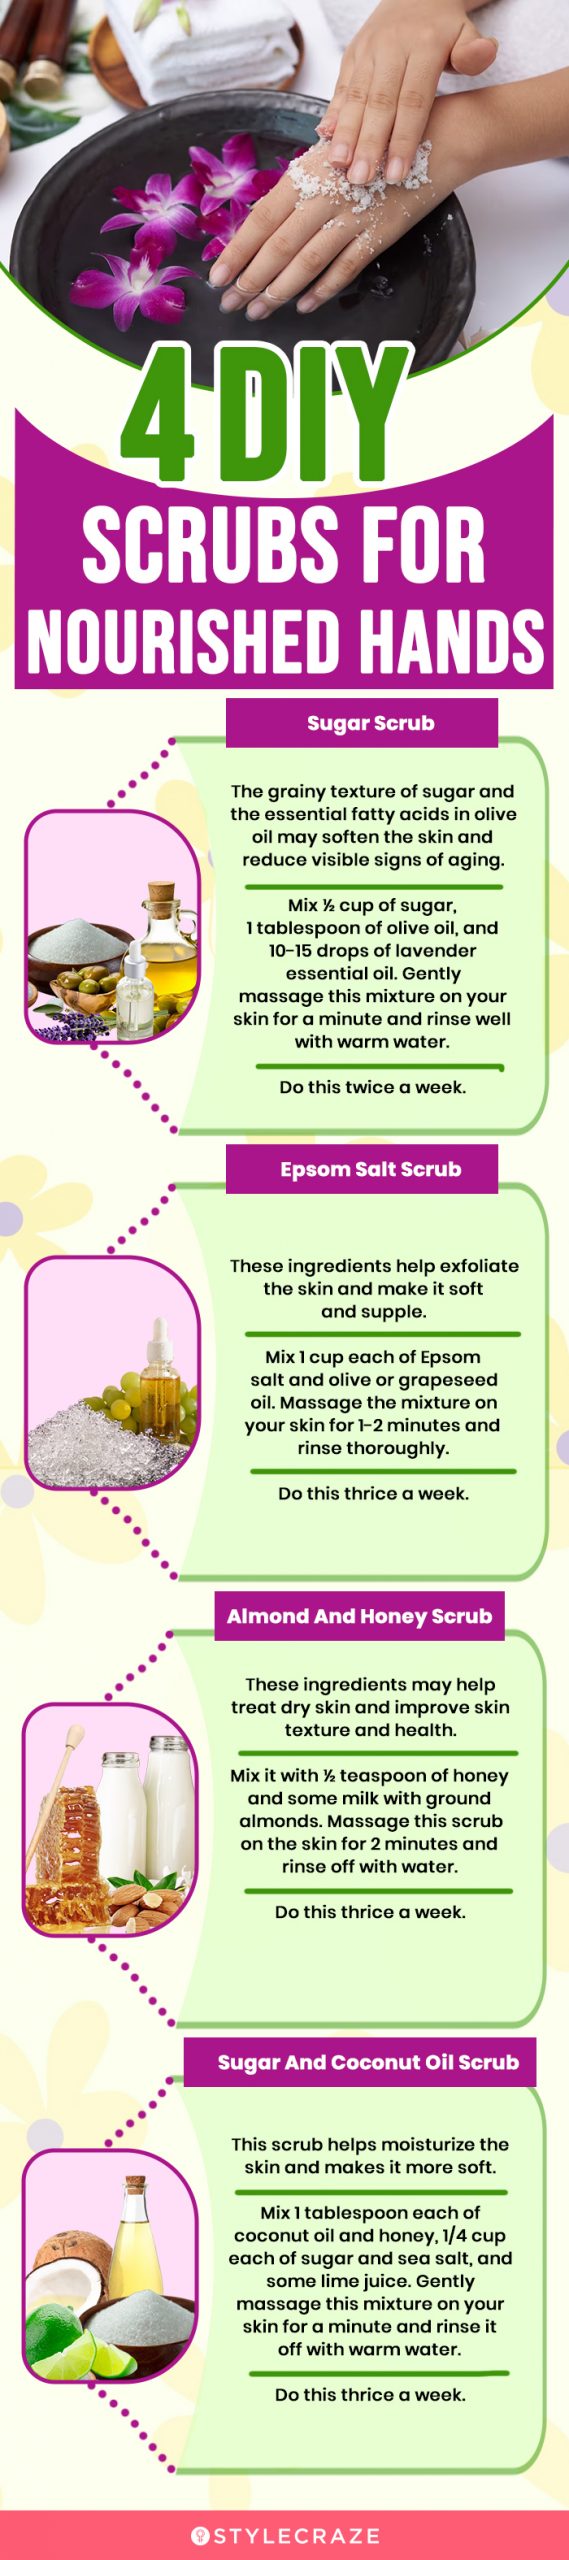 4 diy scrubs for nourished hands(infographic)